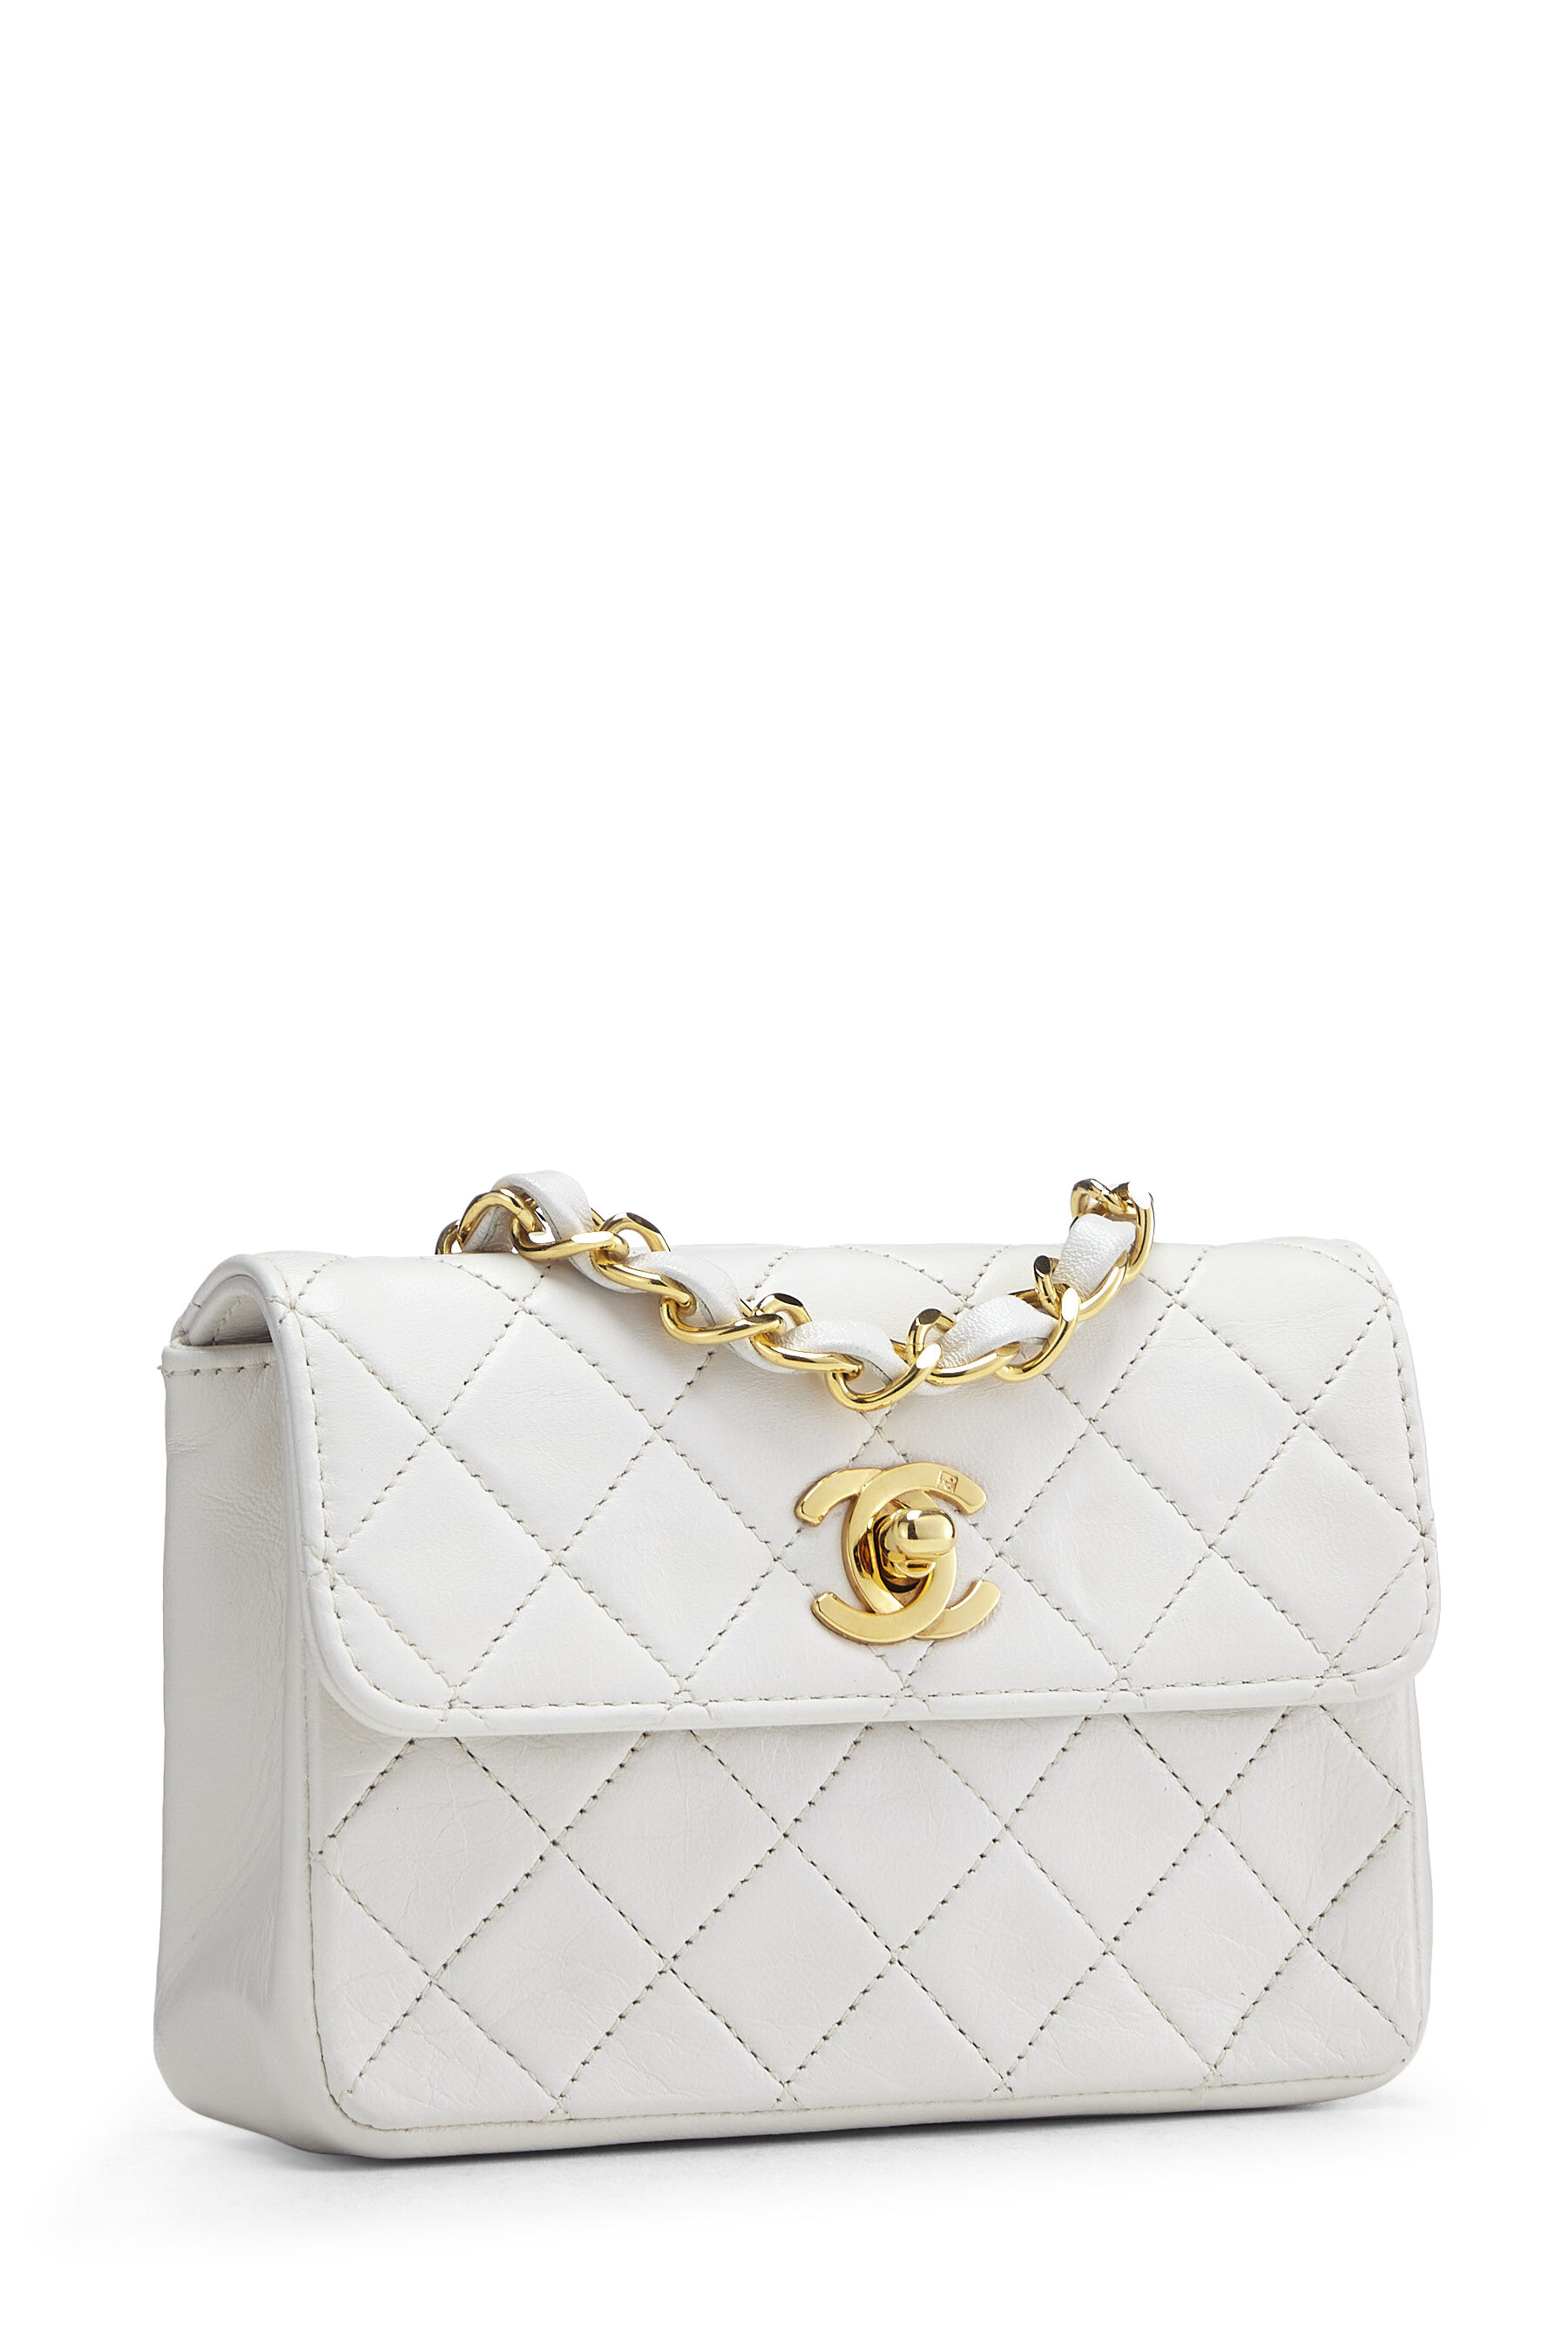 Chanel - White Quilted Lambskin Half Flap Micro